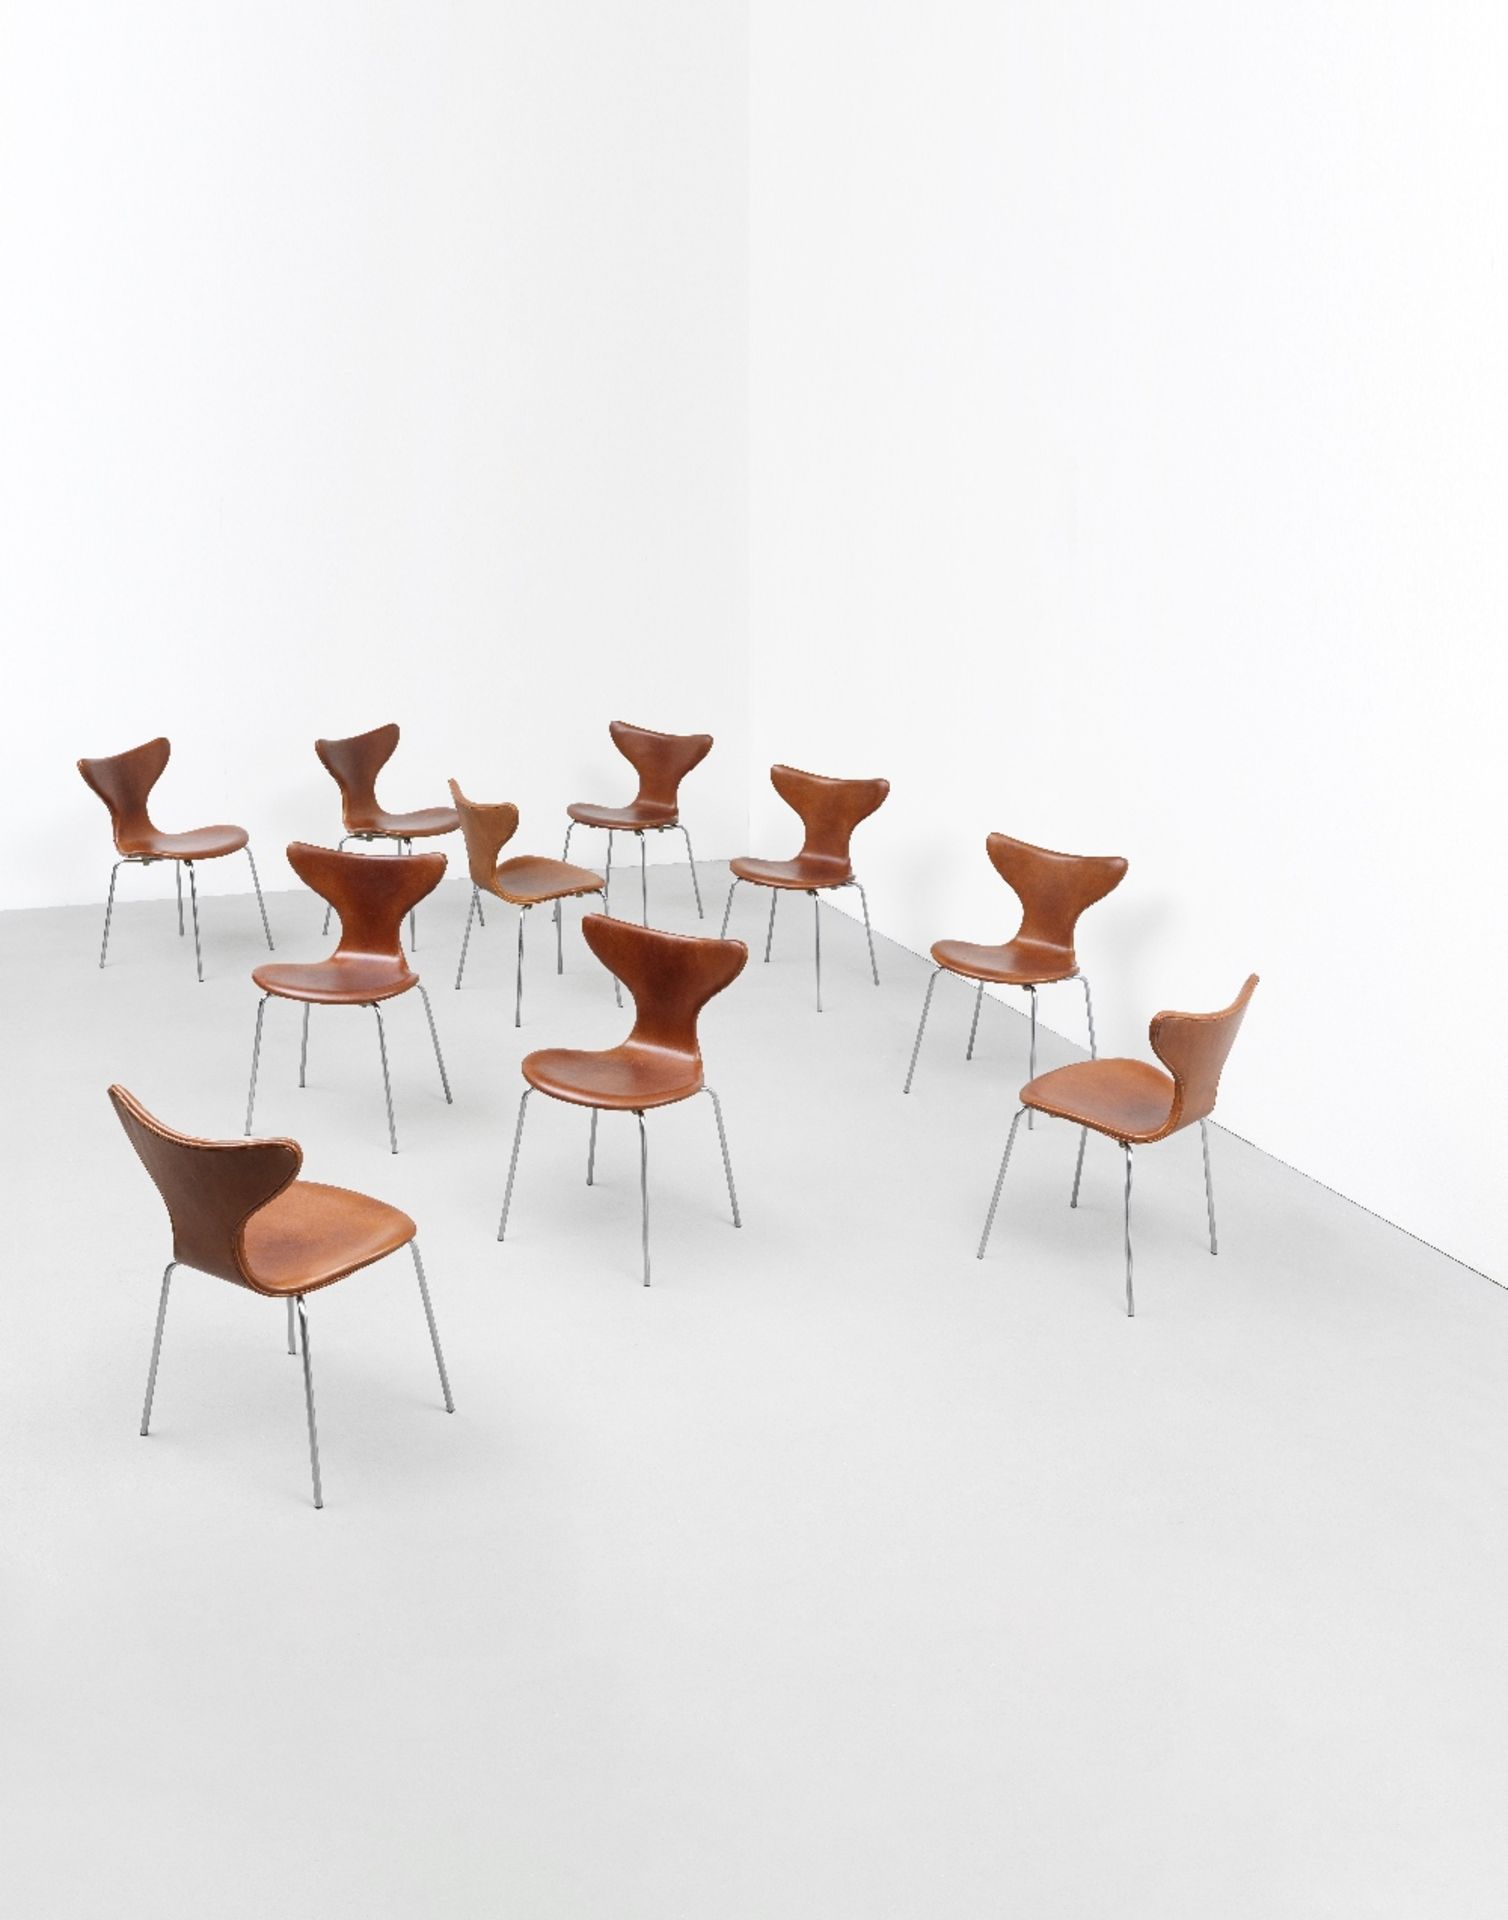 Arne Jacobsen Set of ten 'Lily' stacking chairs, model no. 3108, designed 1961, produced 1970